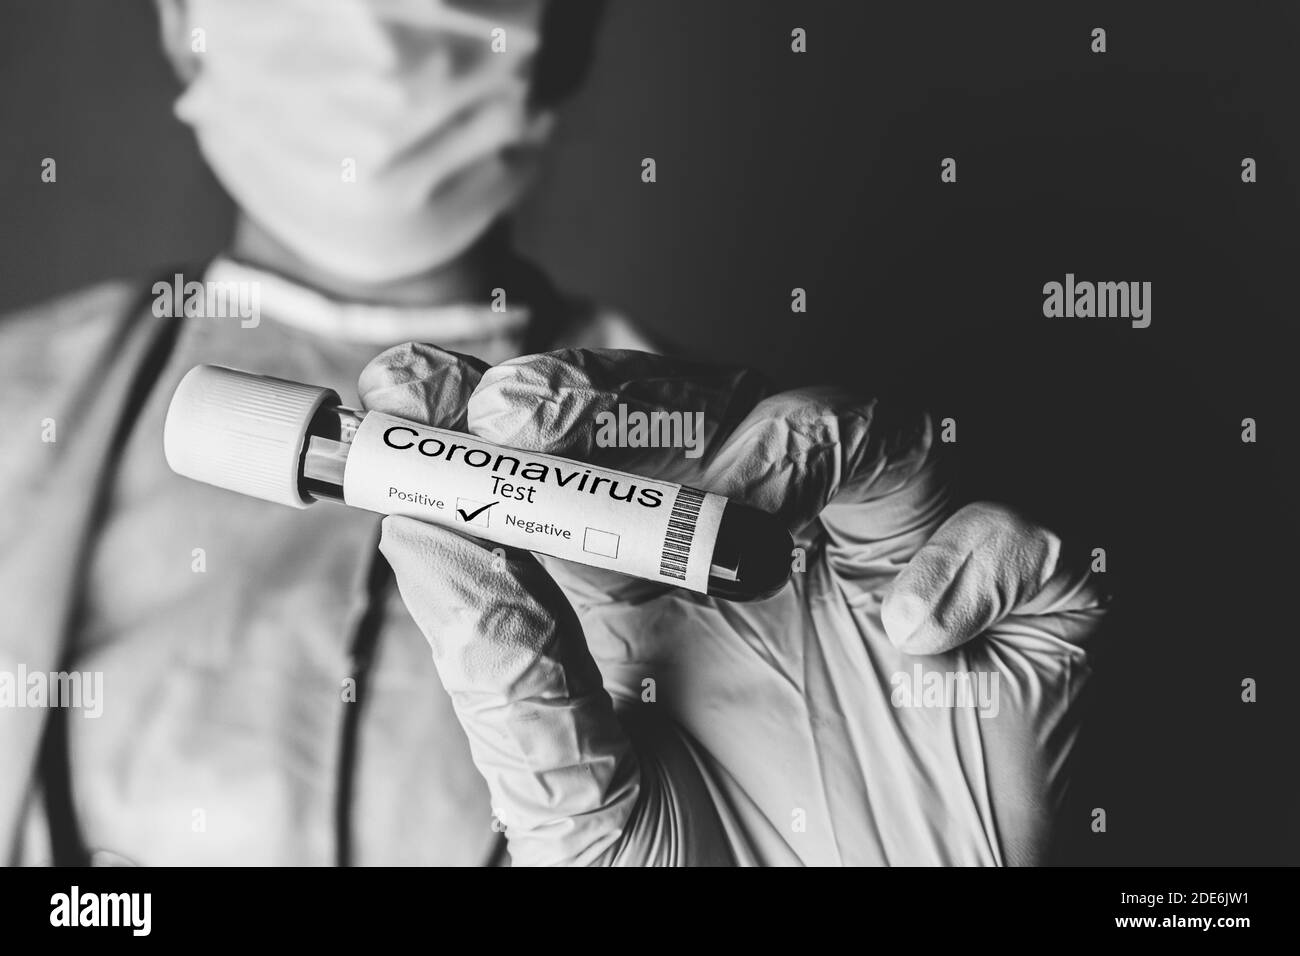 Doctor holds a test tube containing a patient’s sample that has tested positive for coronavirus. Covid-19 concept. Stock Photo